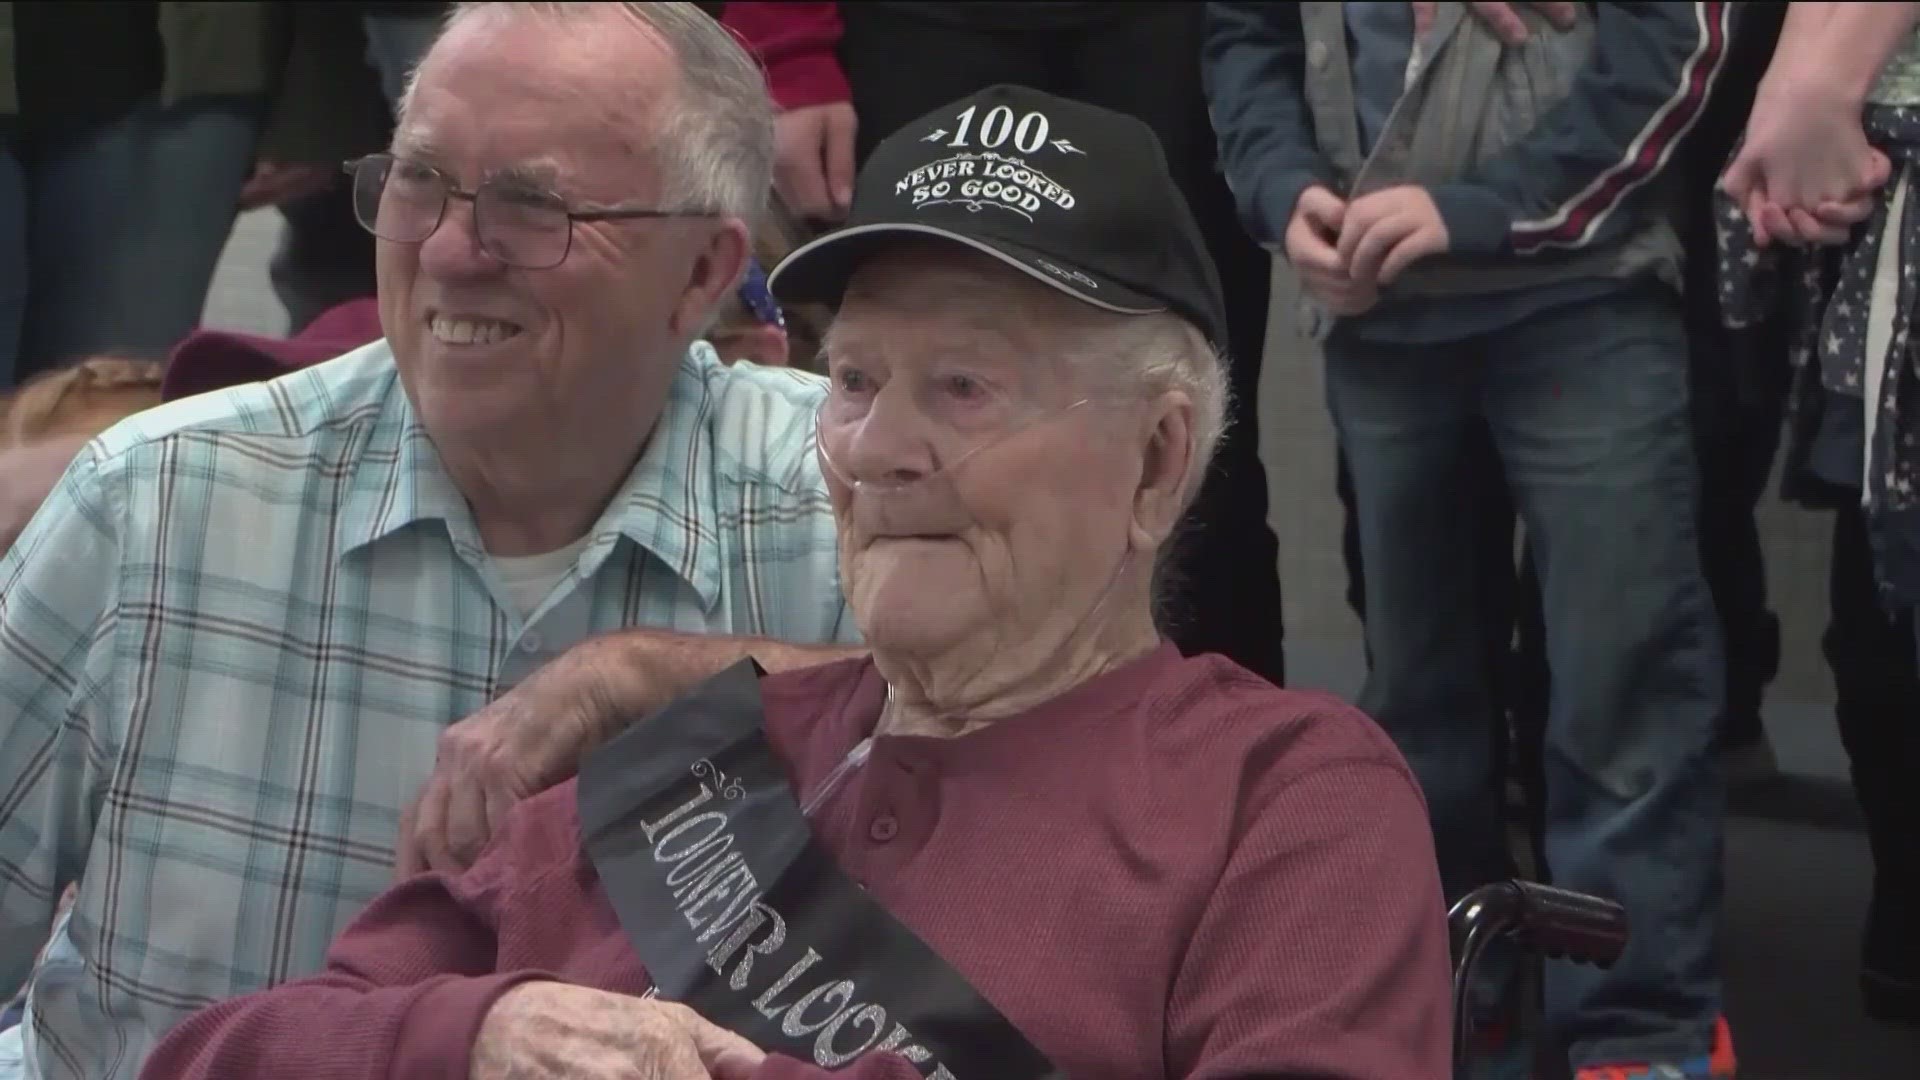 Family and friends of a World War 2 vet came together this week to celebrate a milestone birthday.